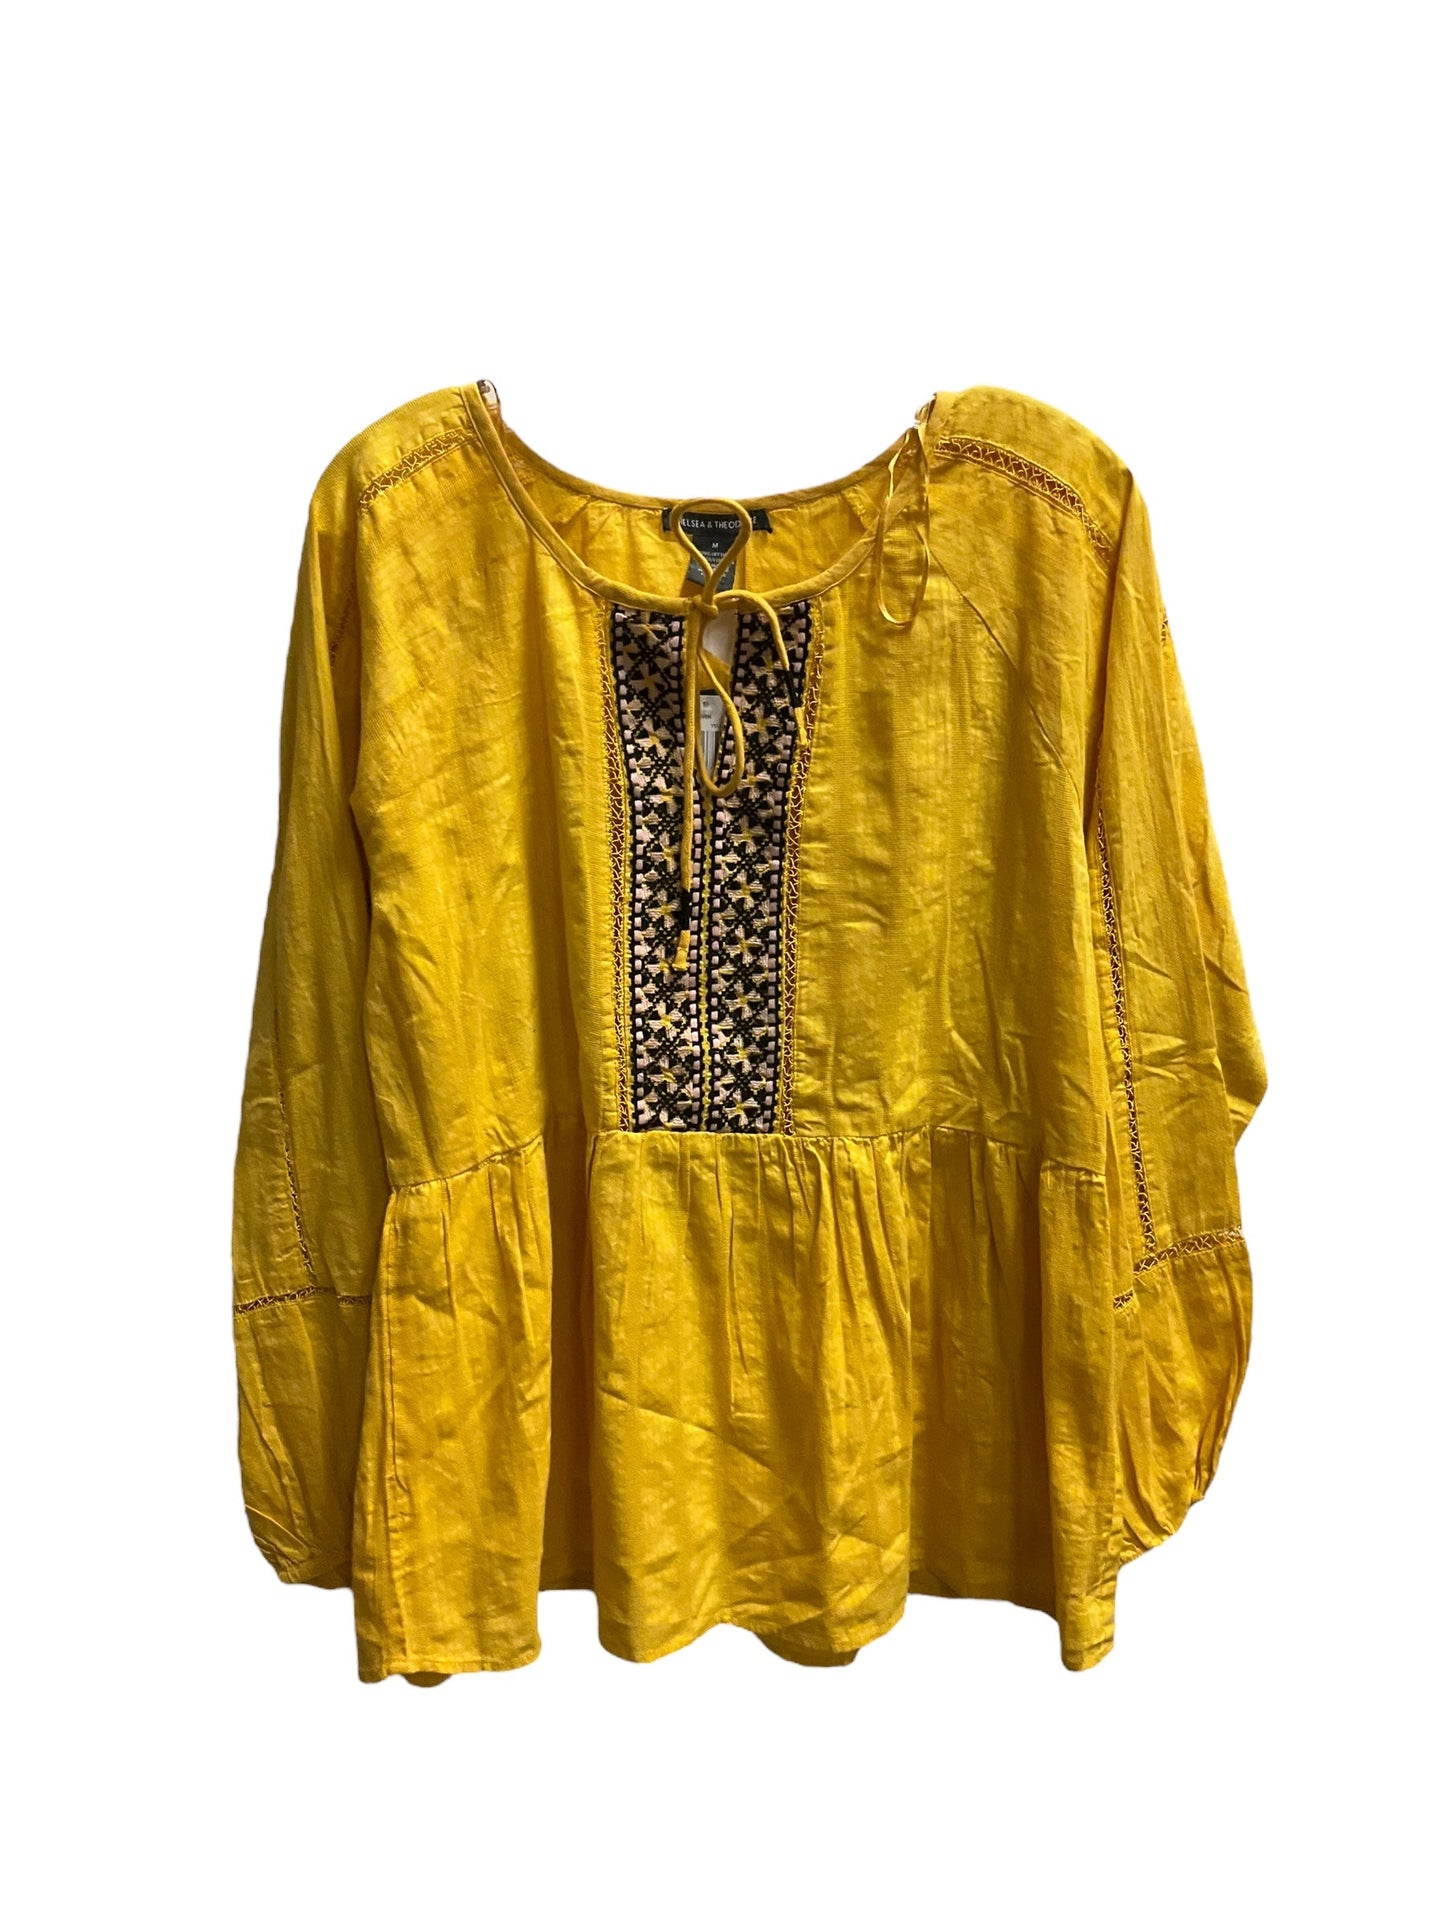 Yellow Top Long Sleeve Chelsea And Theodore, Size M